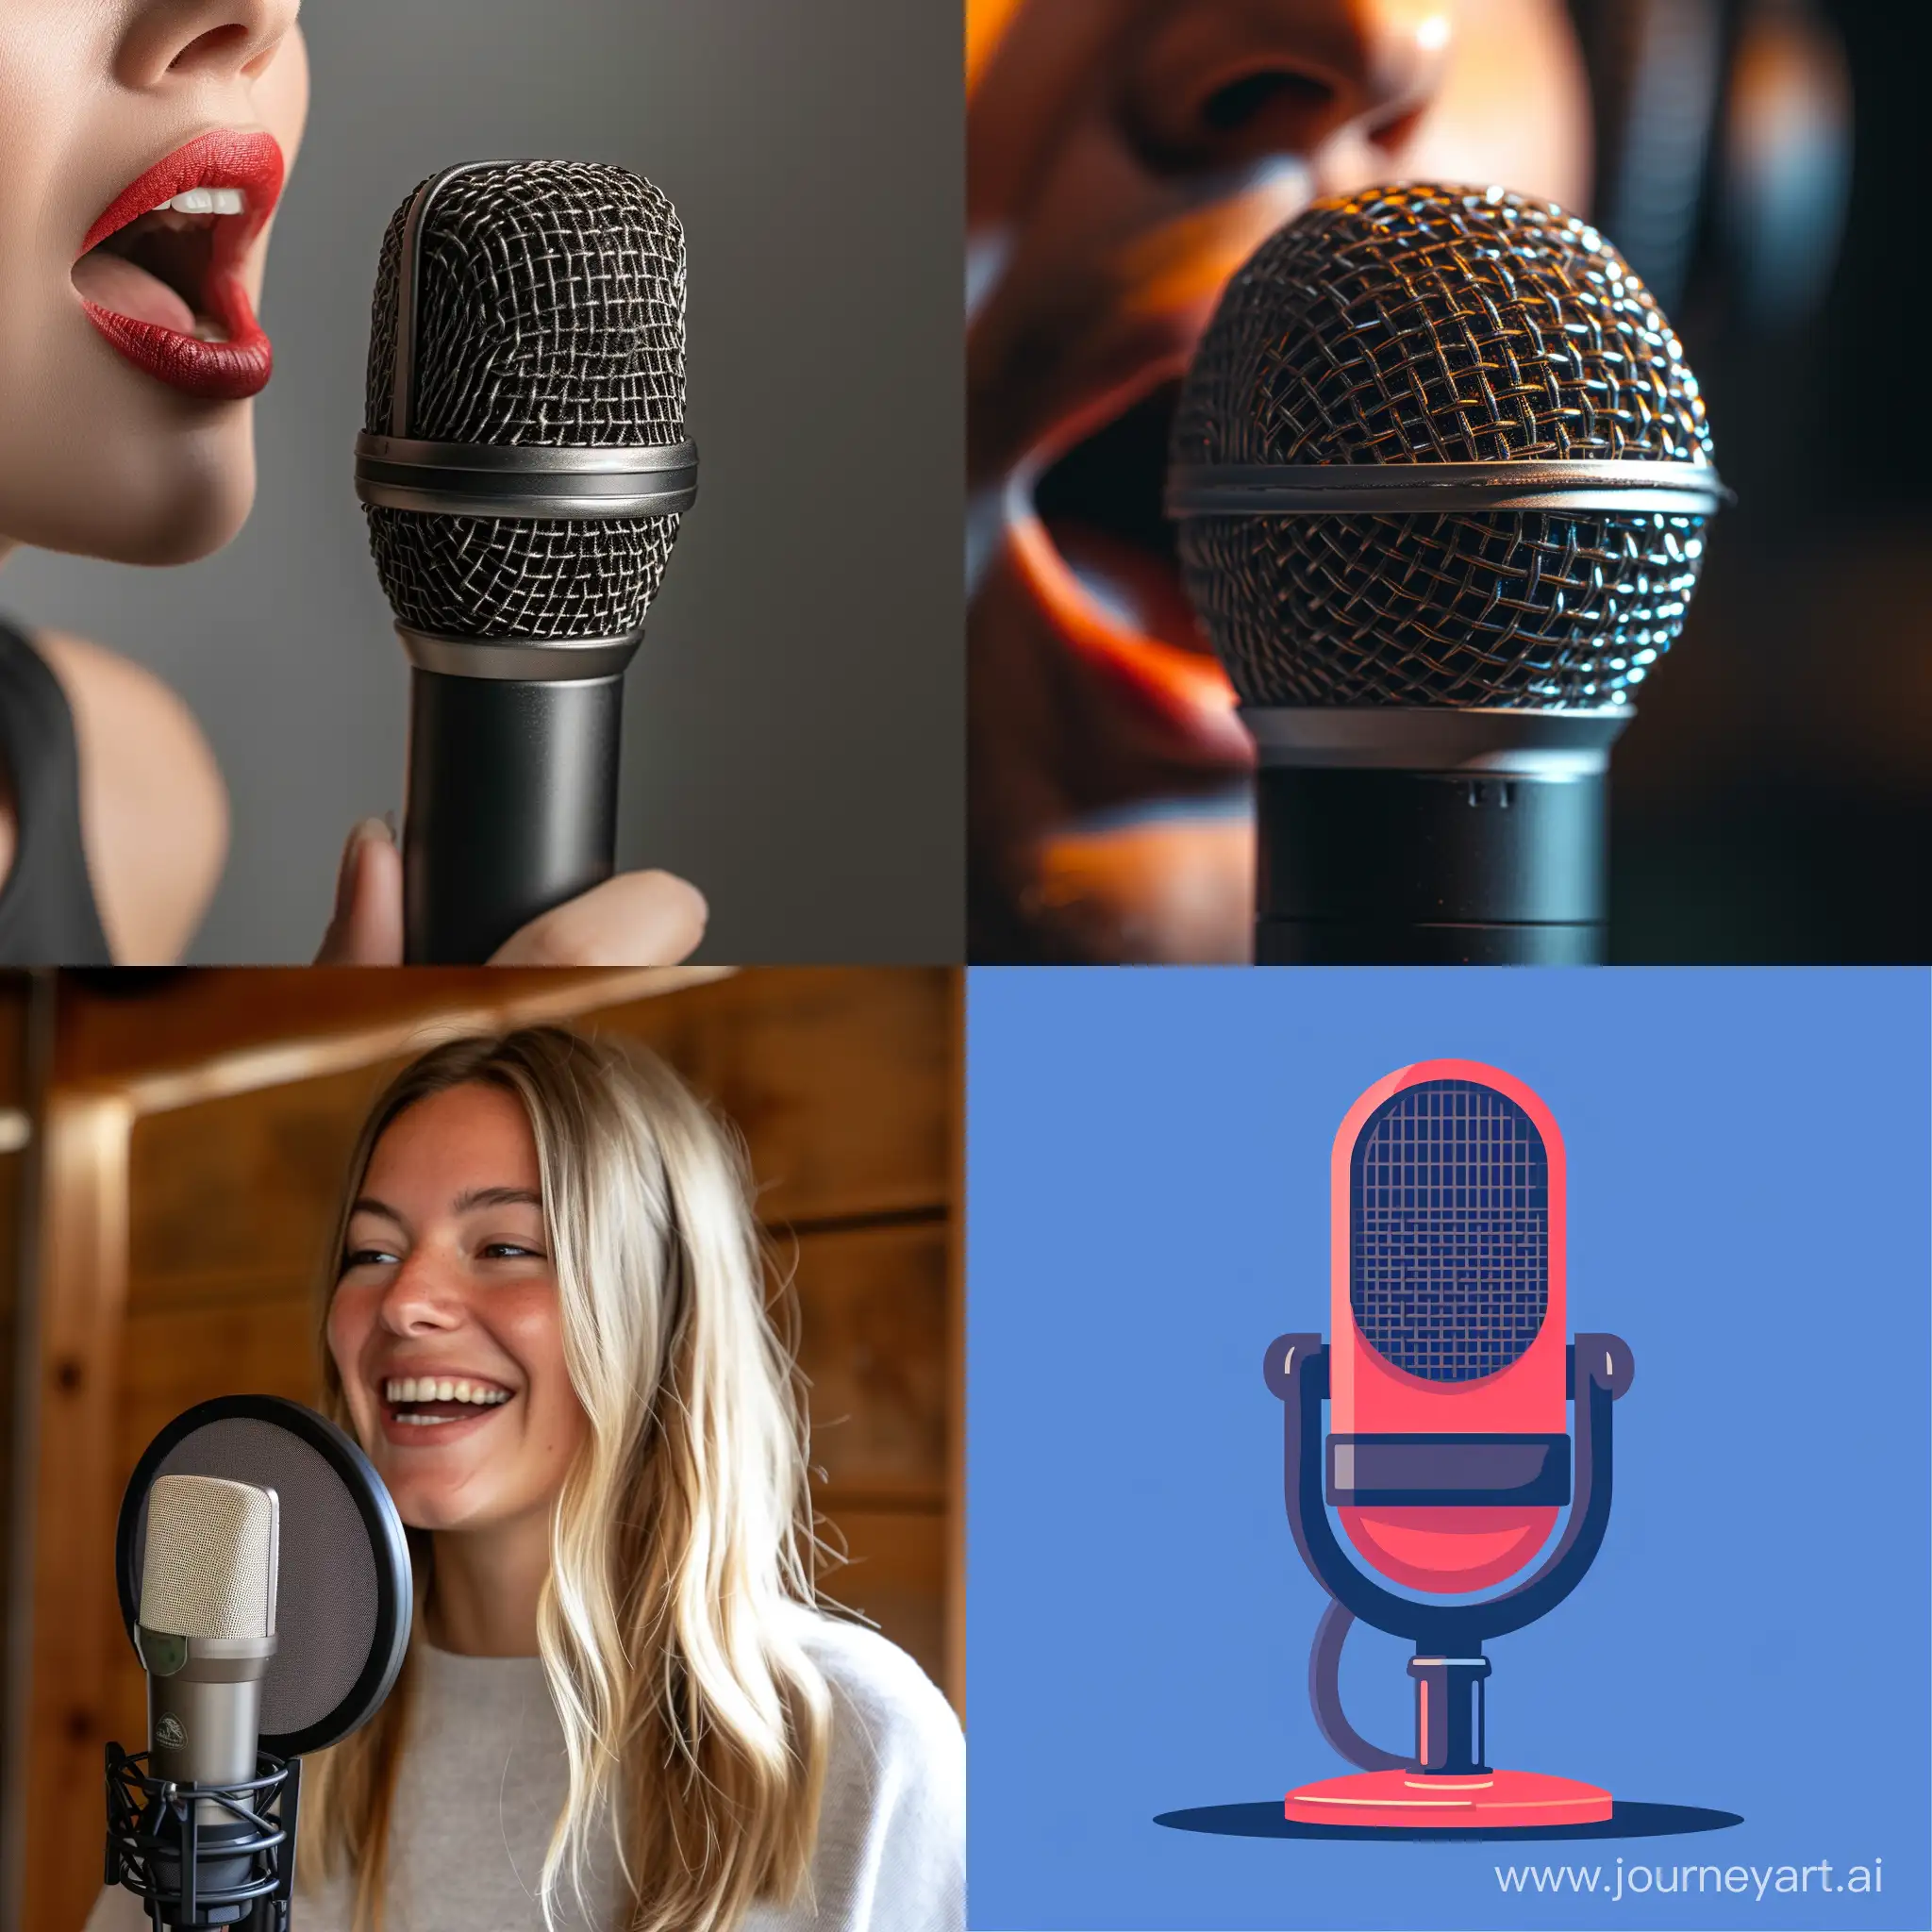 Create a high fidelity voice clone with just a few seconds of audio. Seamlessly use your voice in projects without the hassle of expensive do-overs. Elevate your content using your authentic self.